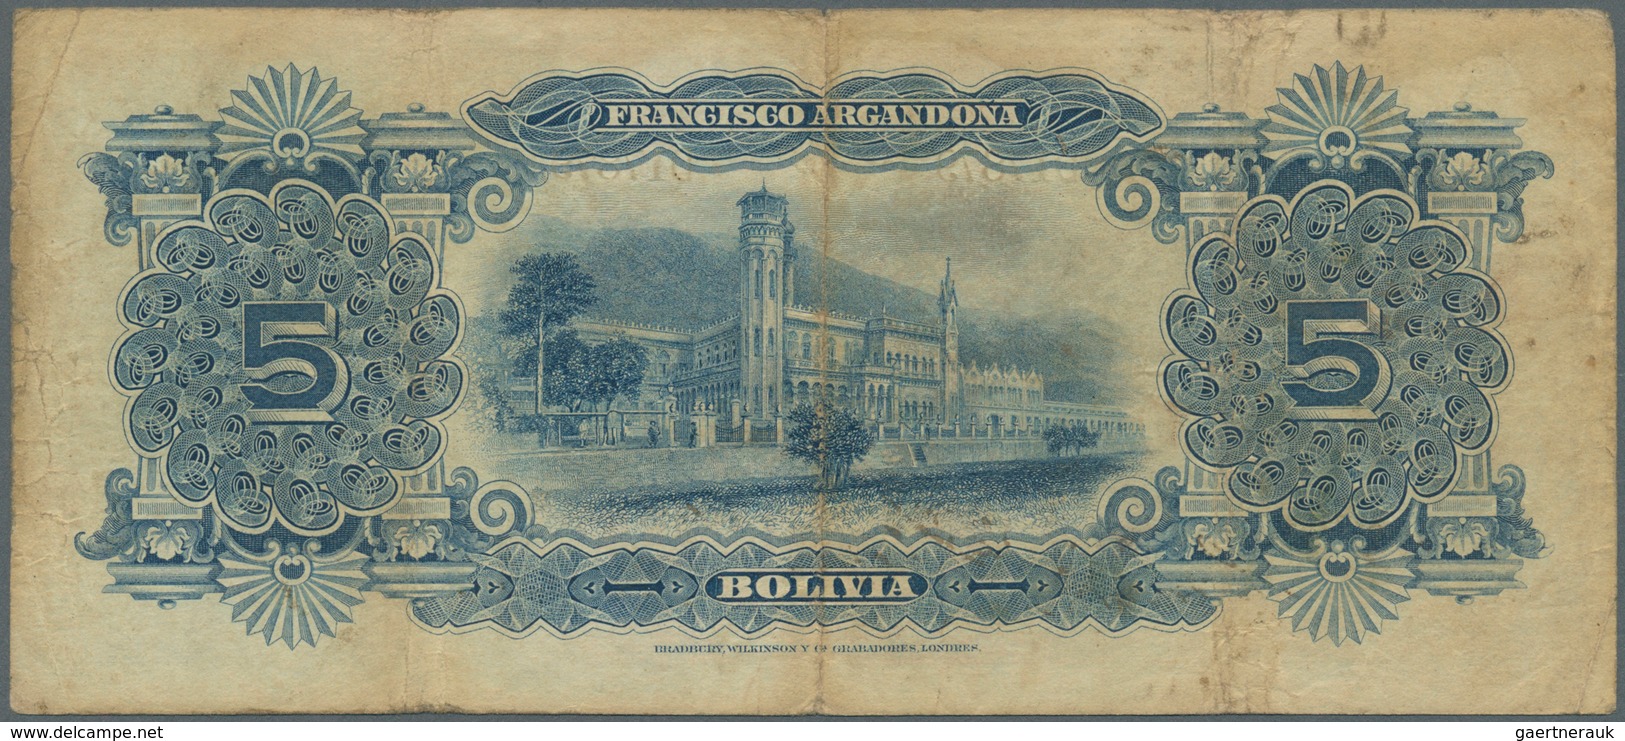 Bolivia / Bolivien:  Banco Francisco Argandoña 5 Bolivianos 1907, P.S150, Lightly Stained Paper With - Bolivië